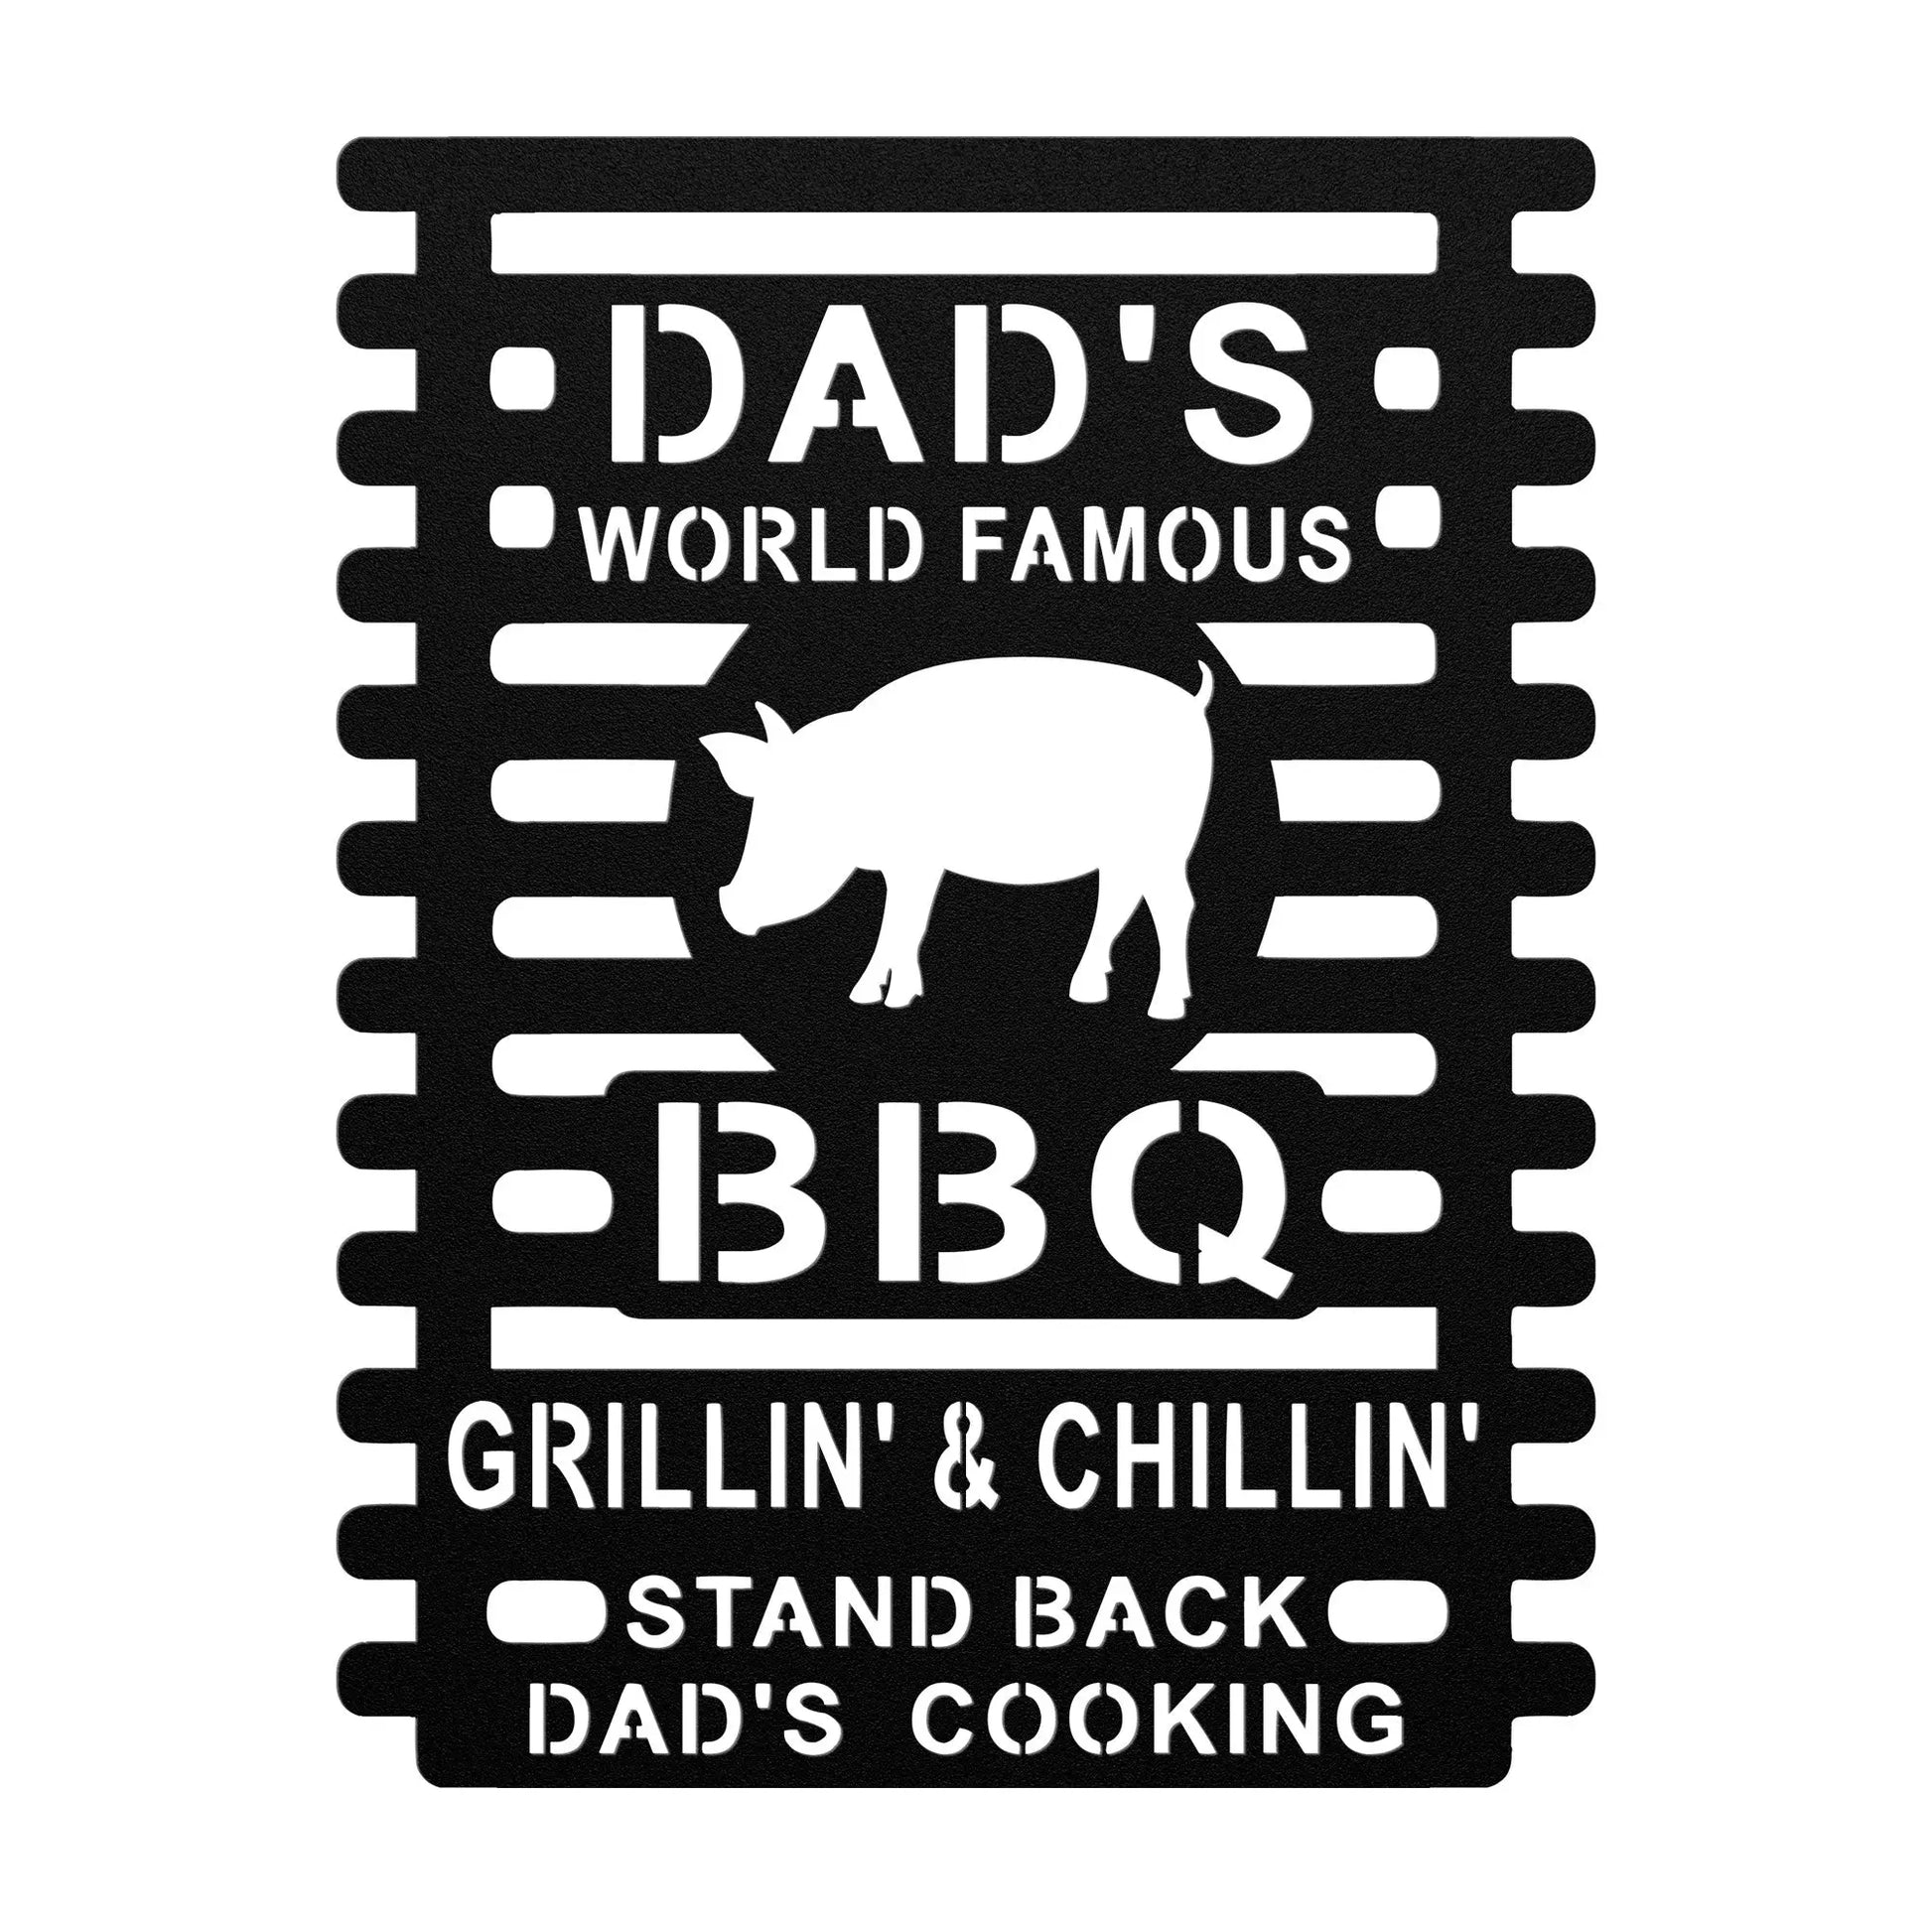 Wall Art Personalized Smokehouse Sign, Personalized Metal Grilling Sign, Metal Grill Sign, Grilling Gift, BBQ Sign, Backyard Sign, Gift for Grill teelaunch